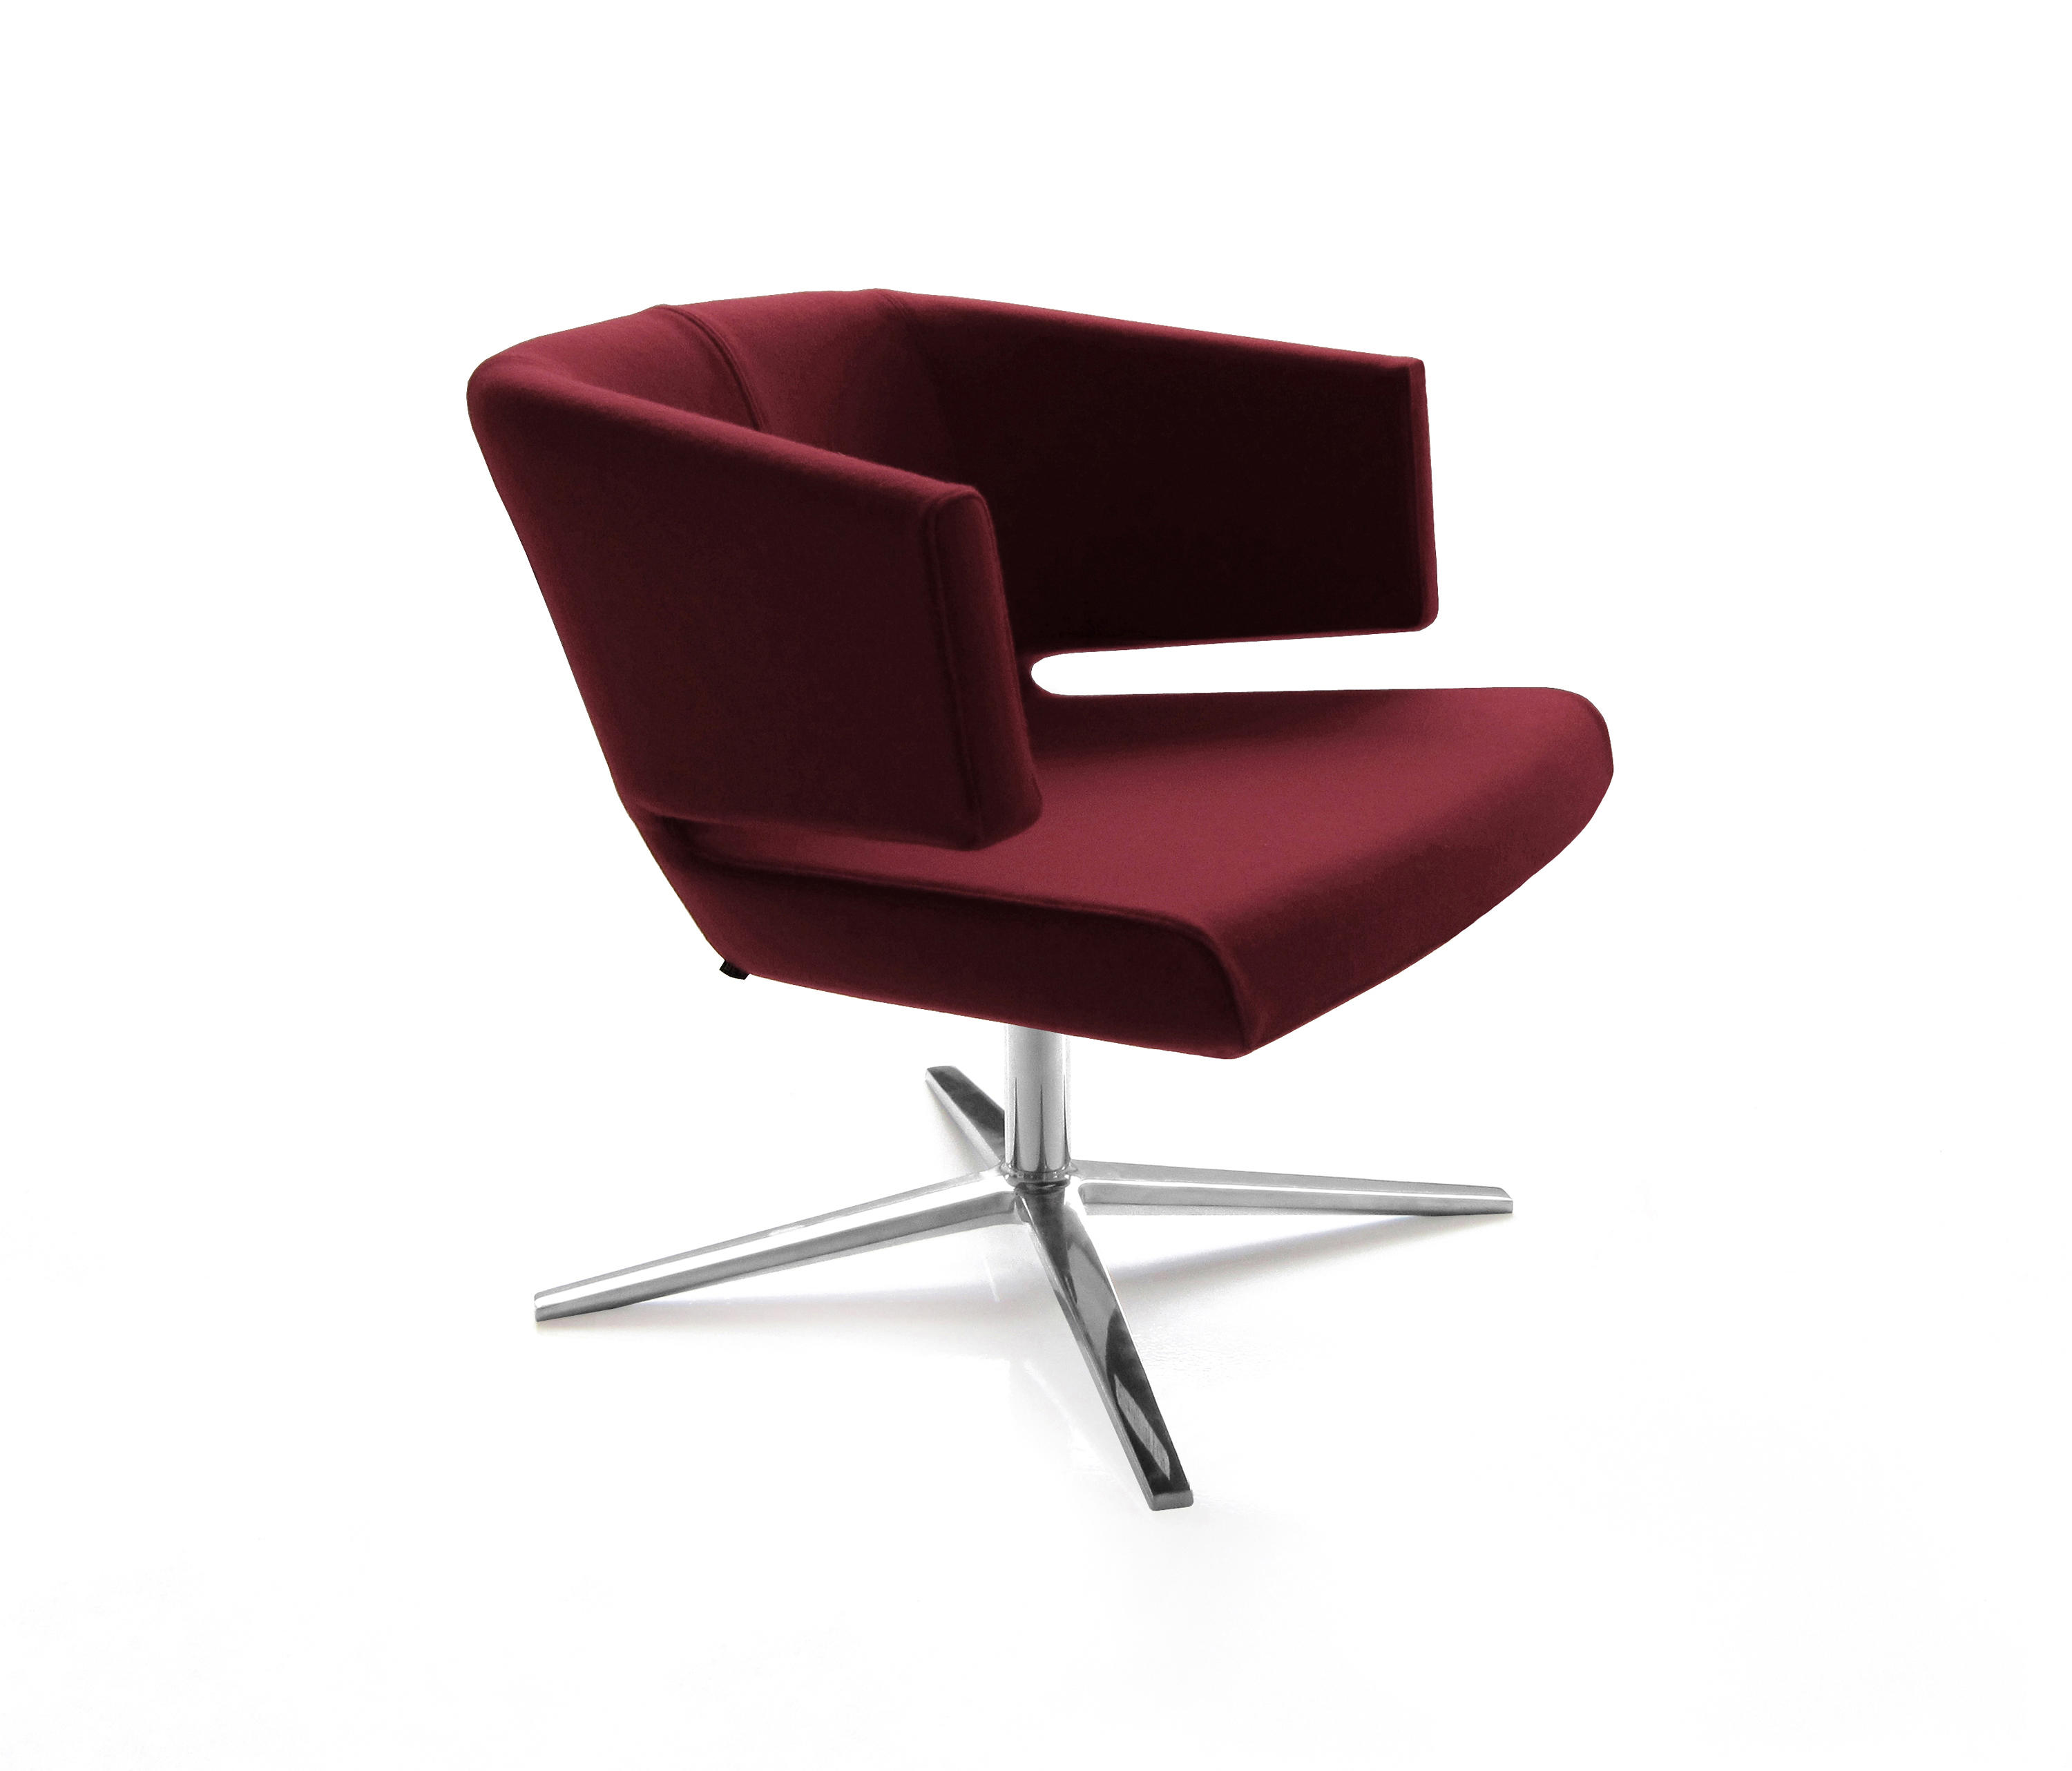 Lotus Chair Chairs From Bensen Architonic